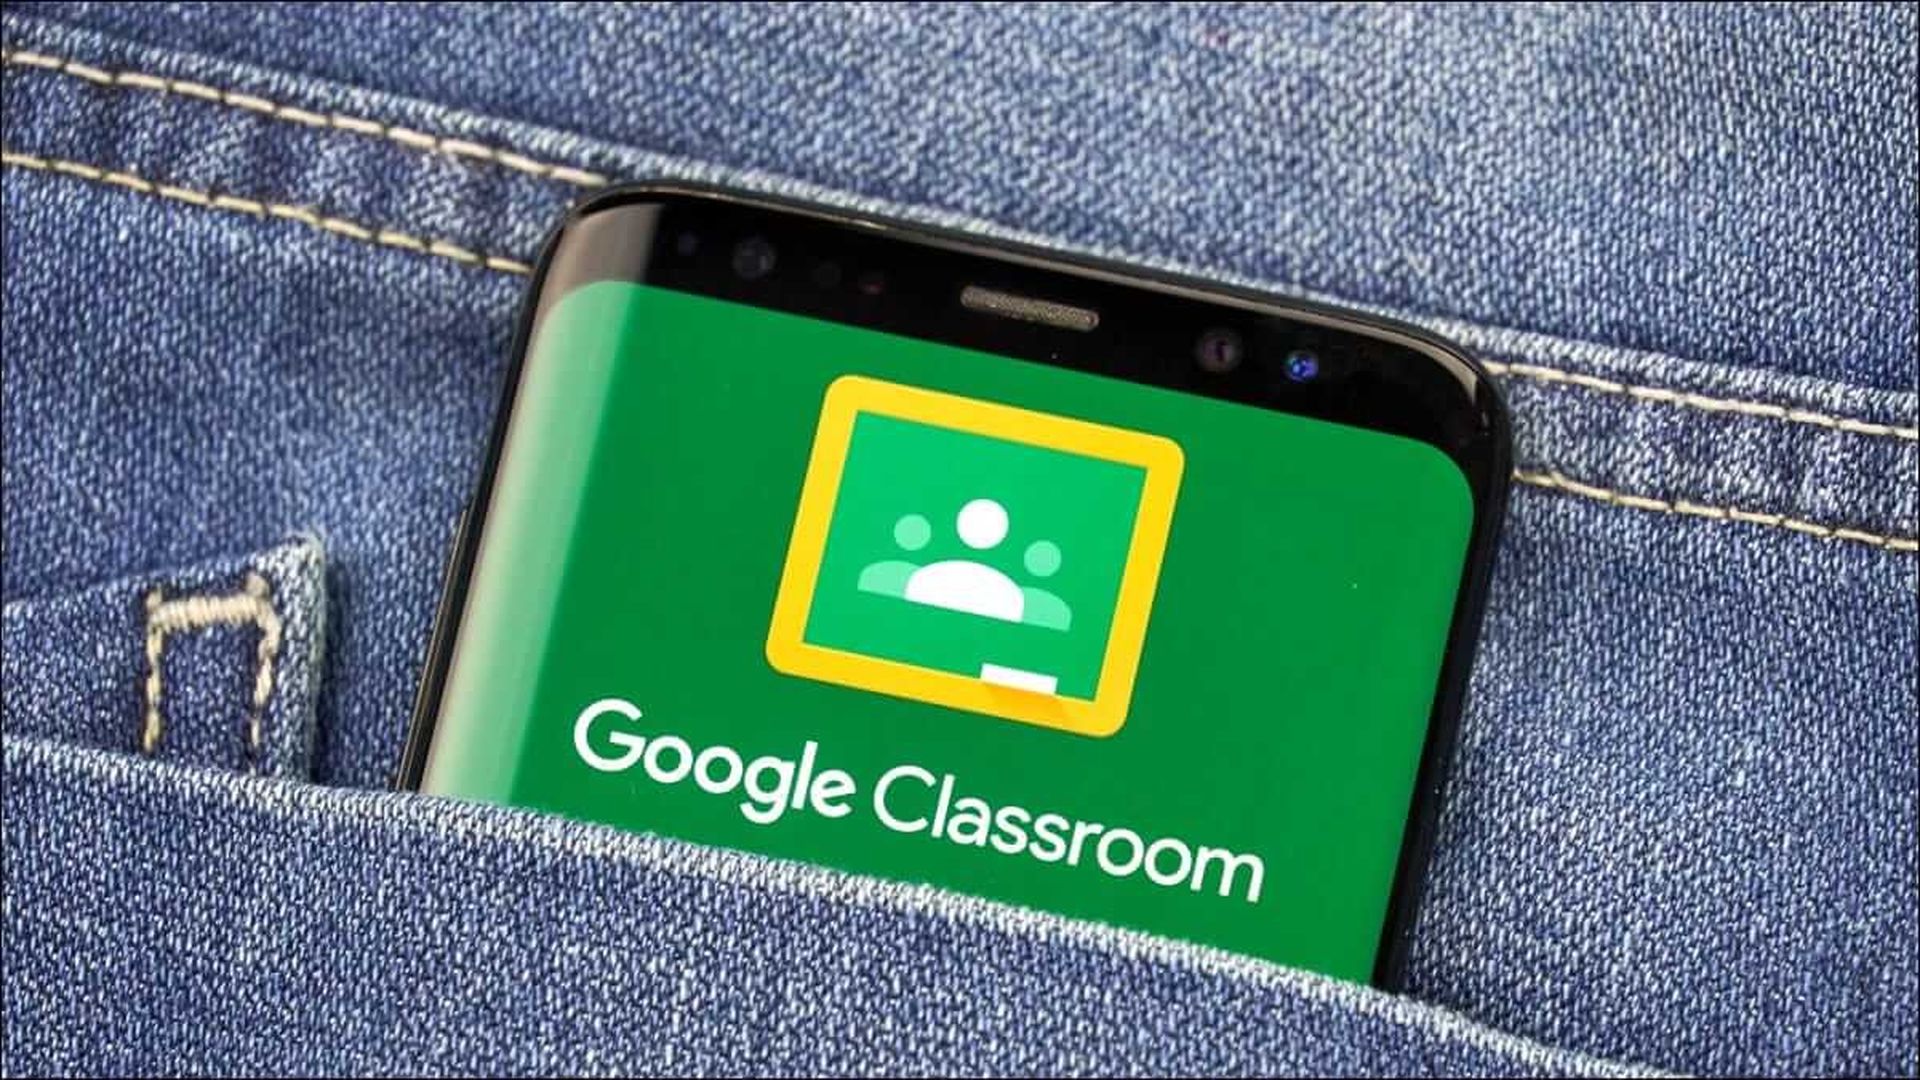 If you don't know how to leave a class in Google Classroom, we are here to help.